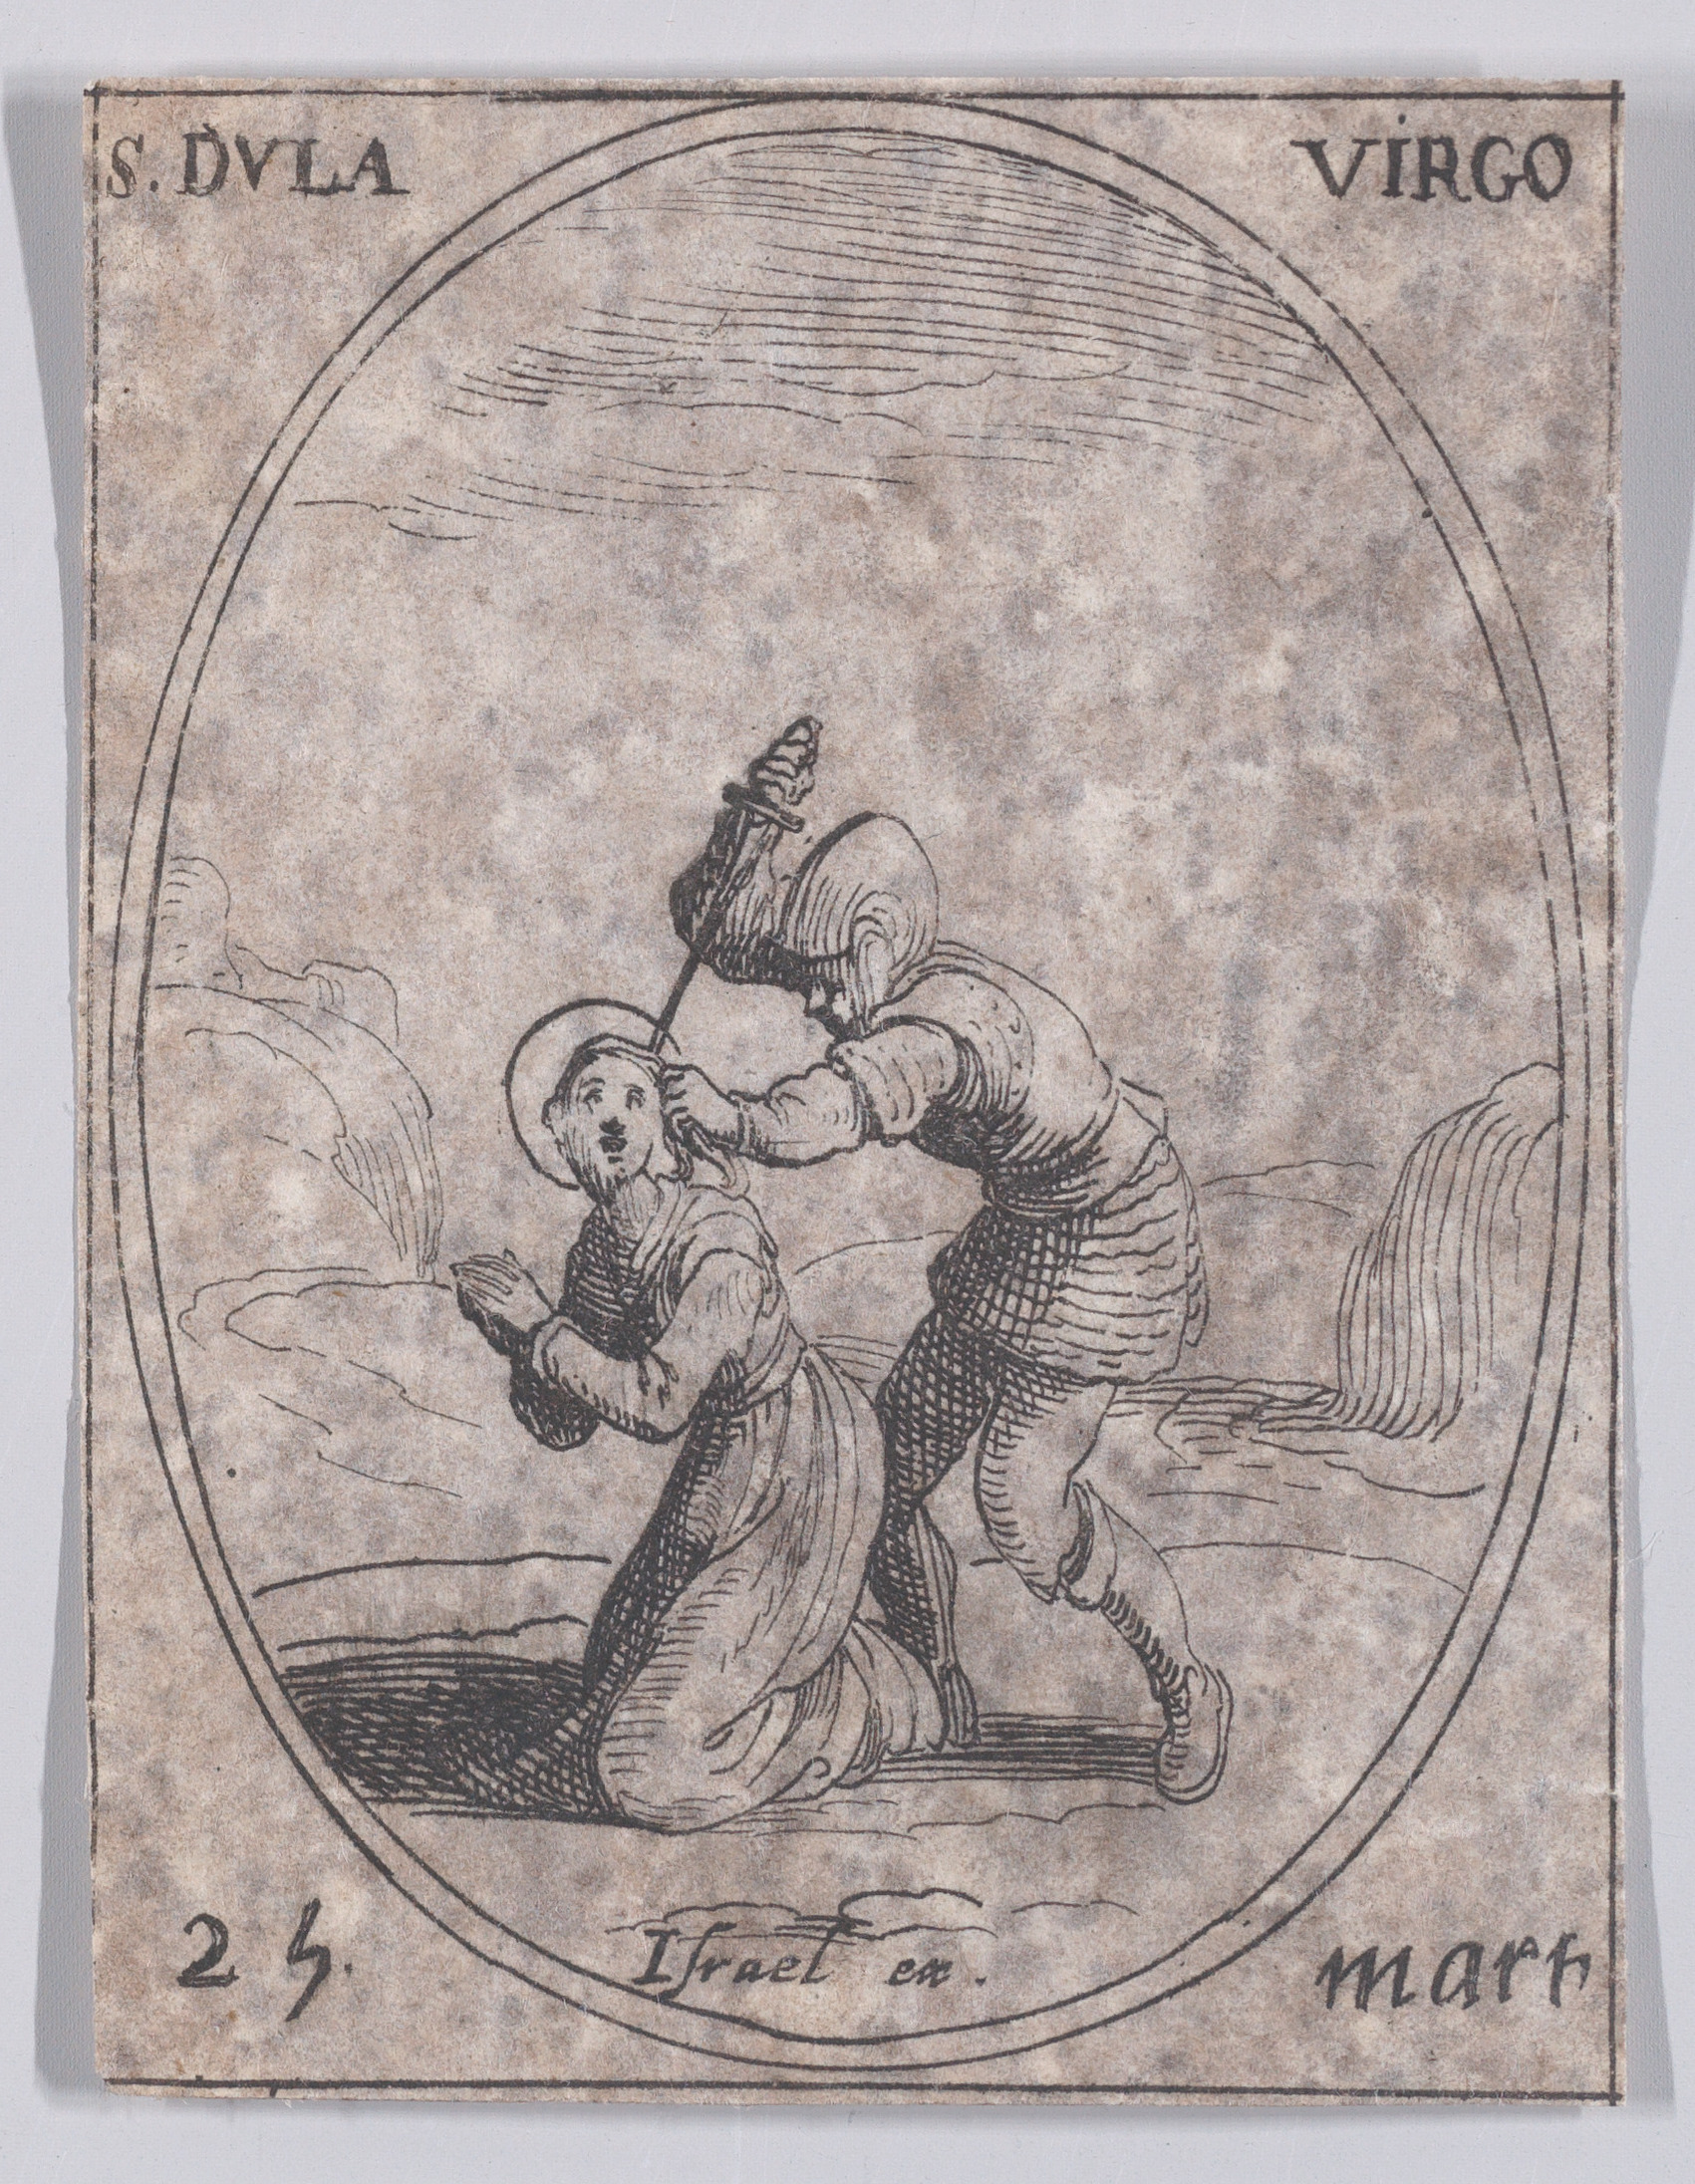 Ste. Dule, vierge (St. Dula, Virgin), March 25th, from Les Images De Tous Les Saincts et Saintes de L'Année (Images of All of the Saints and Religious Events of the Year), Jacques Callot (French, Nancy 1592–1635 Nancy), Etching; second state of two (Lieure)